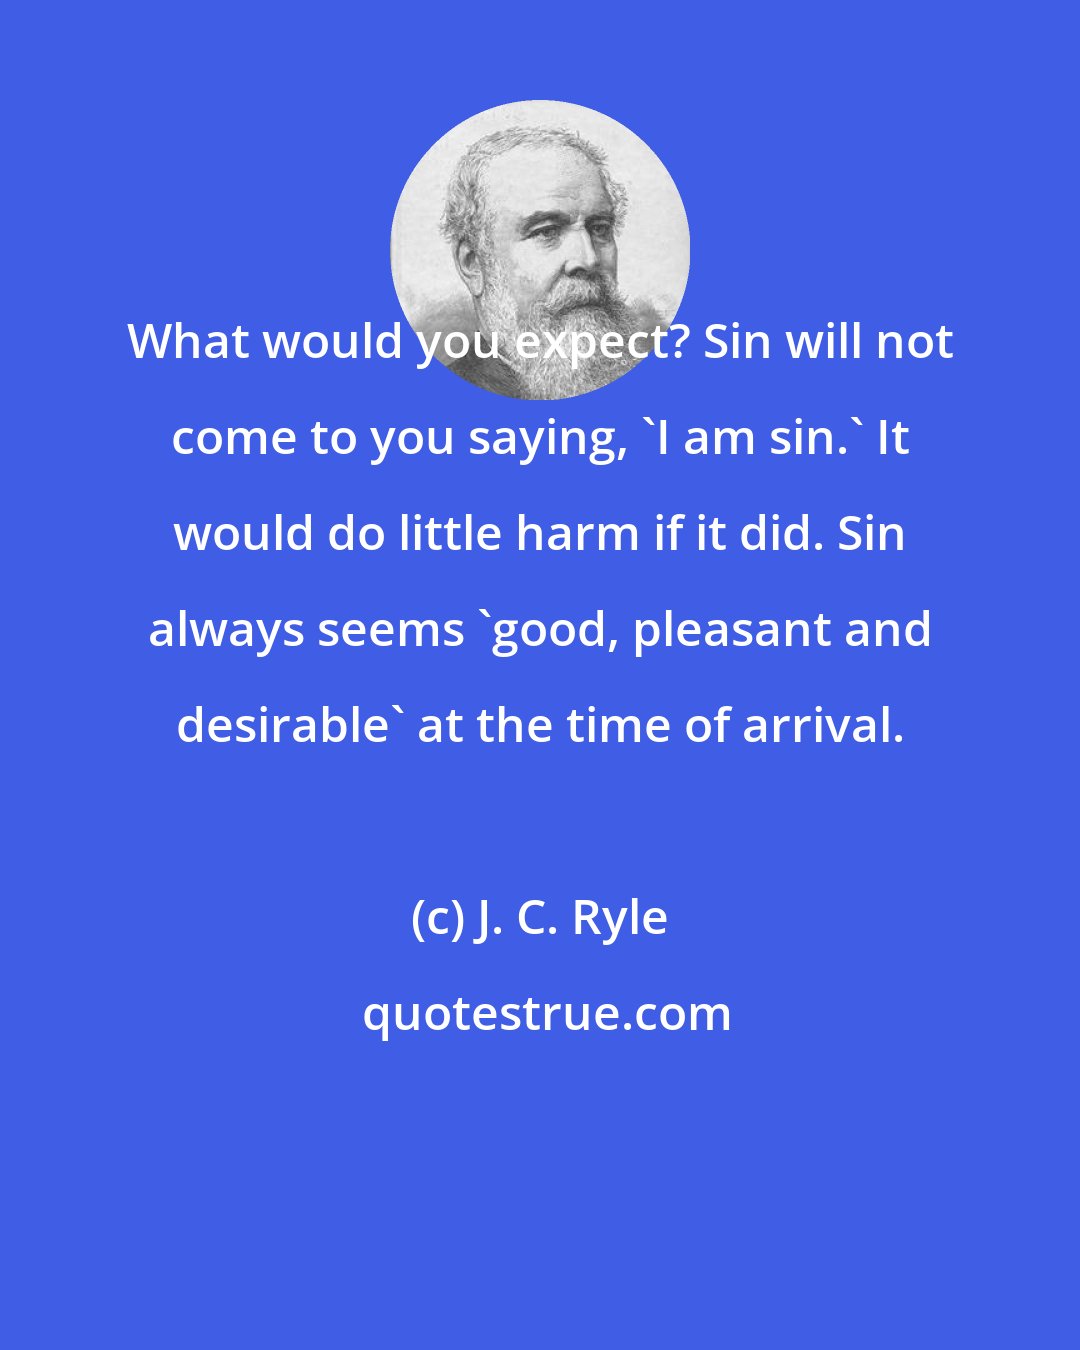 J. C. Ryle: What would you expect? Sin will not come to you saying, 'I am sin.' It would do little harm if it did. Sin always seems 'good, pleasant and desirable' at the time of arrival.